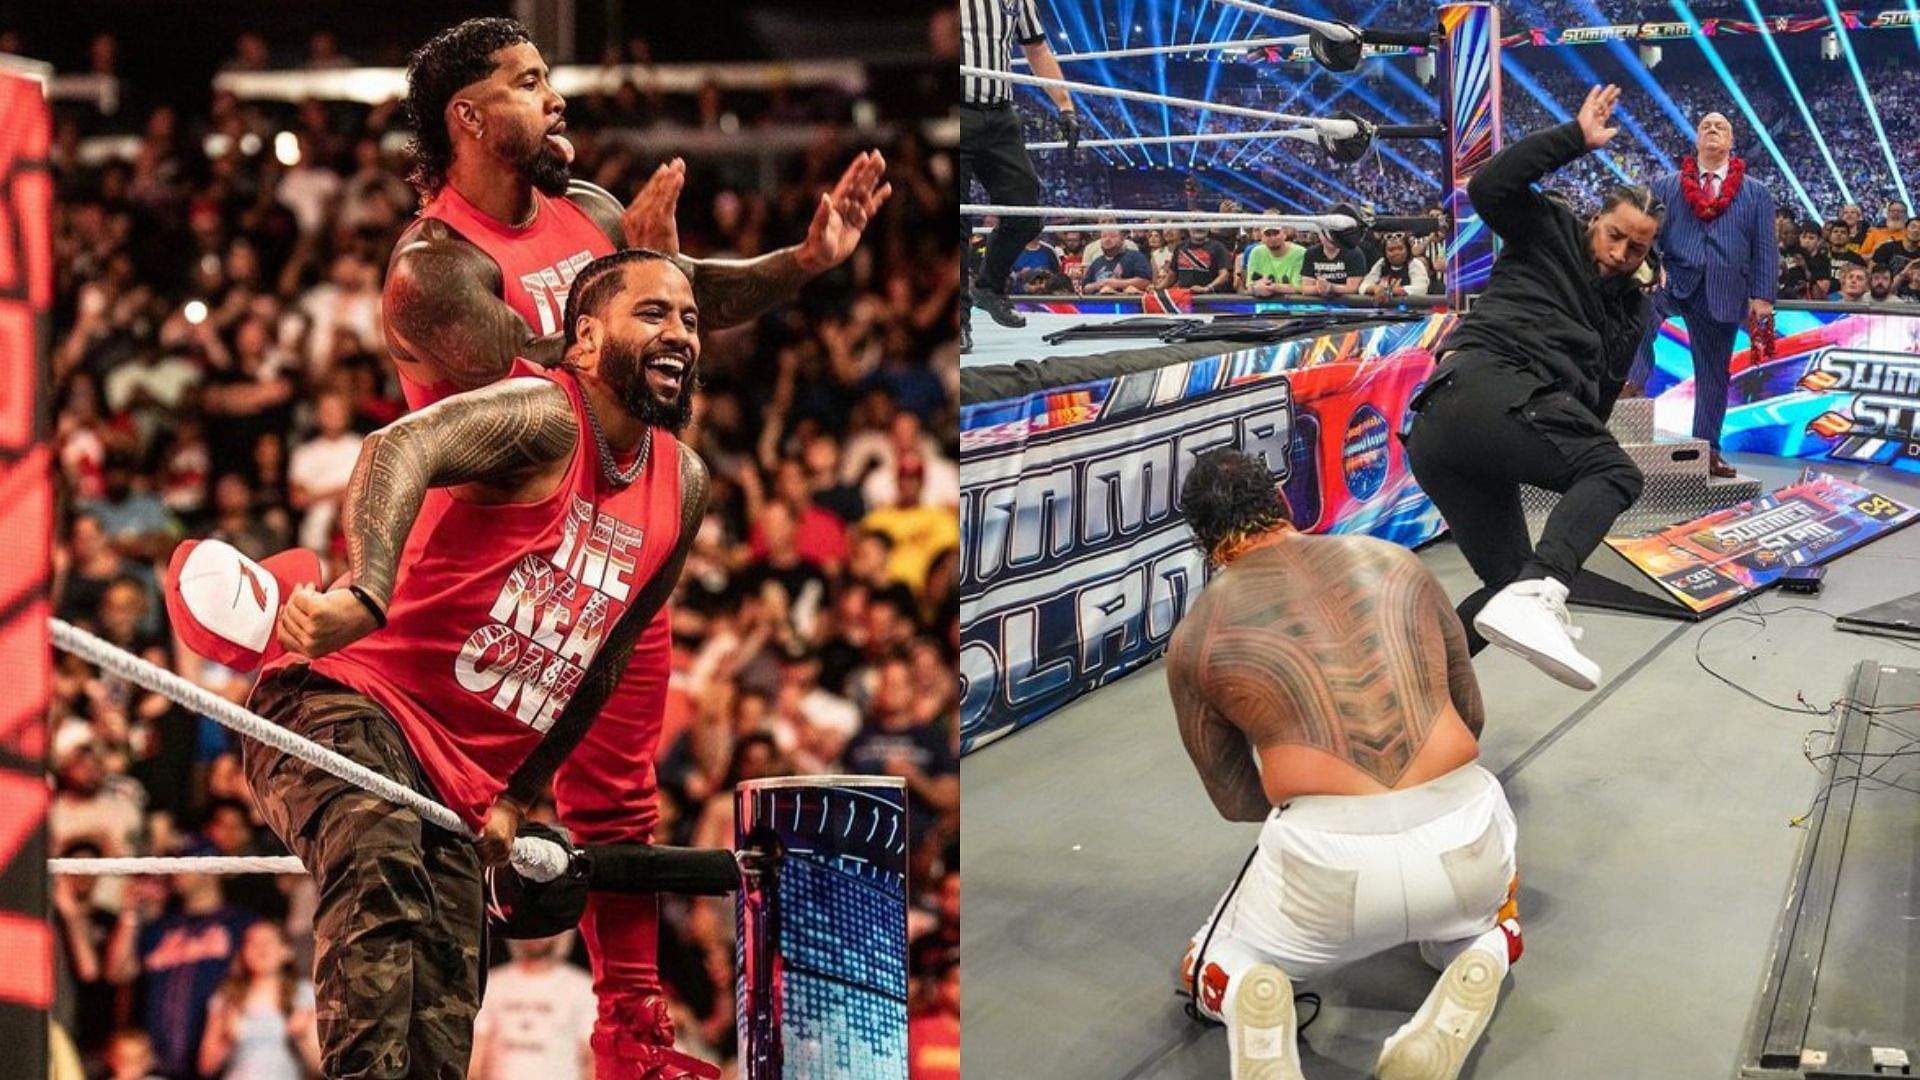 Will Jimmy Uso reunite with Roman Reigns and others?